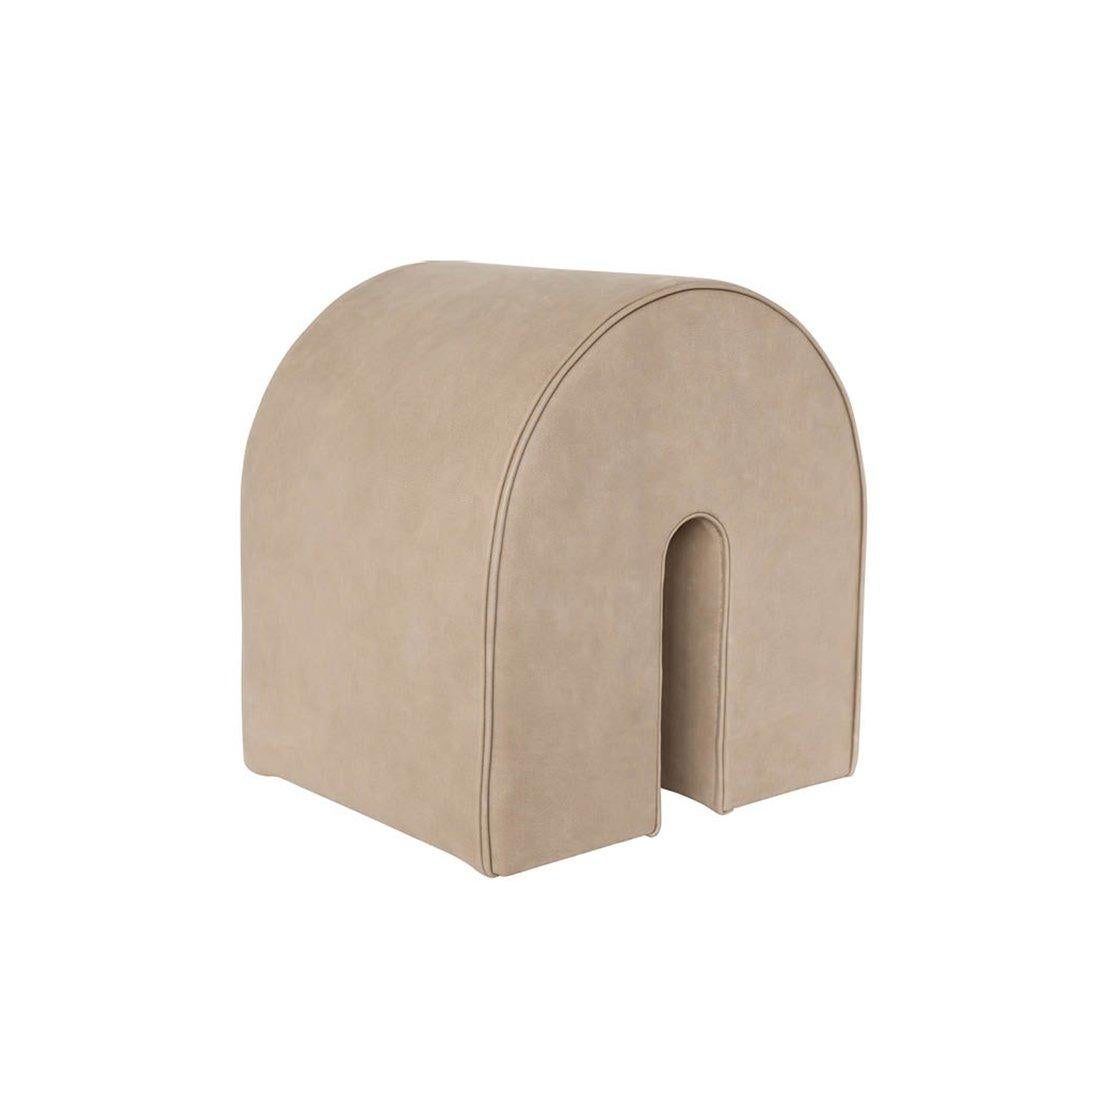 Light brown curved pouf by Kristina Dam Studio.
Materials: Light Brown Aniline Nubuck. 
Also available in other colors.
Dimensions: 36 x 42 x H 42cm.

The Modernist furniture collection takes notions of modern design and yet the distinctive